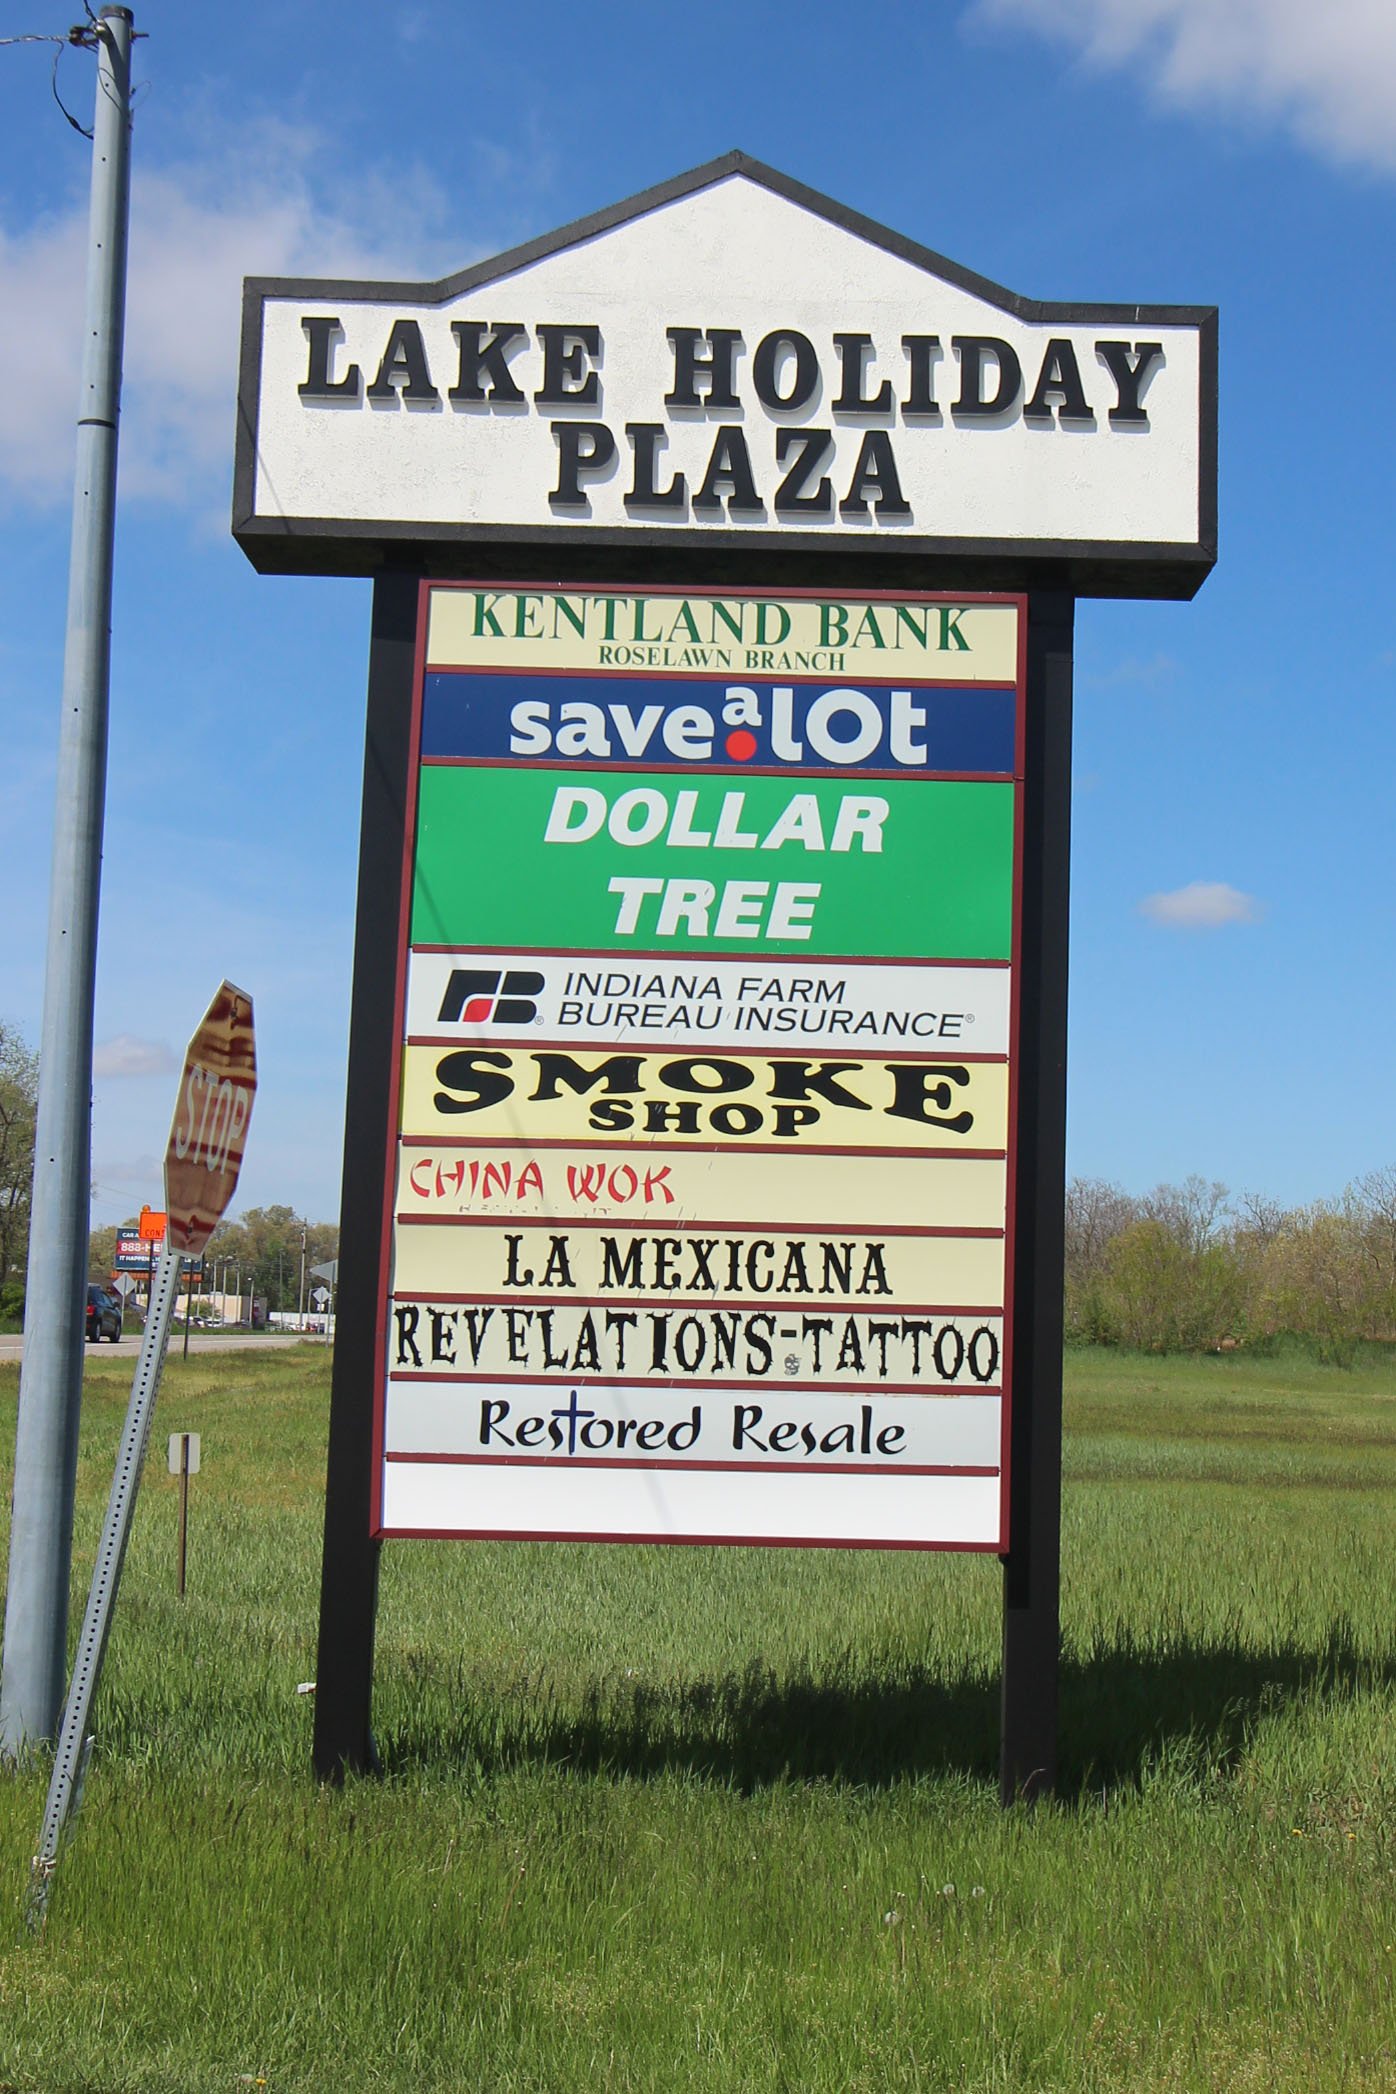 Sturges Property Group-Lake Holiday Plaza, Roselawn/DeMotte, Retail For Sale or Lease